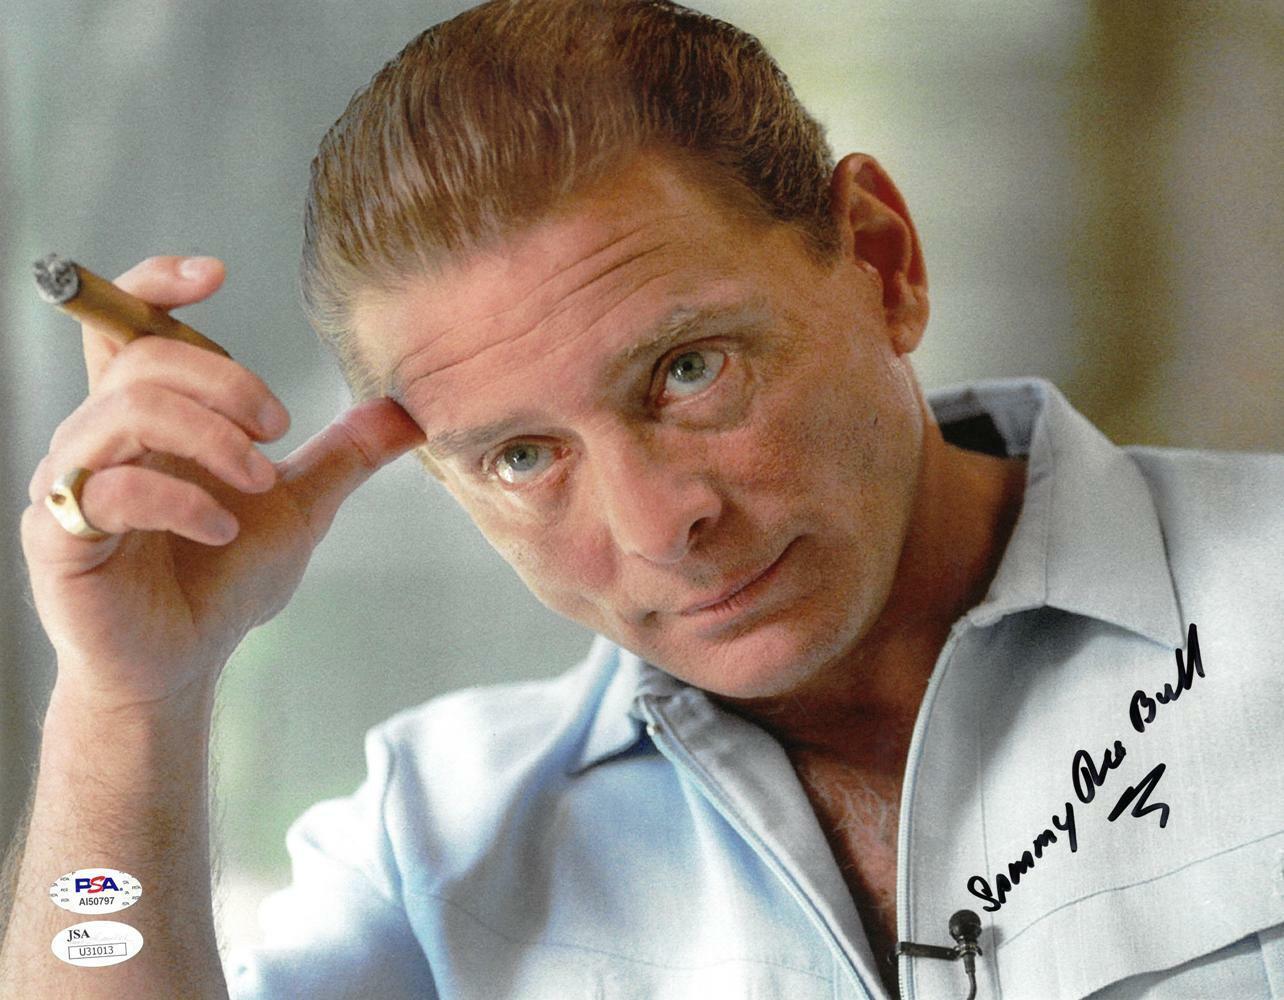 Sammy the Bull Gravano Signed Authentic Autographed 11x14 Photo Poster painting PSA/DNA COA